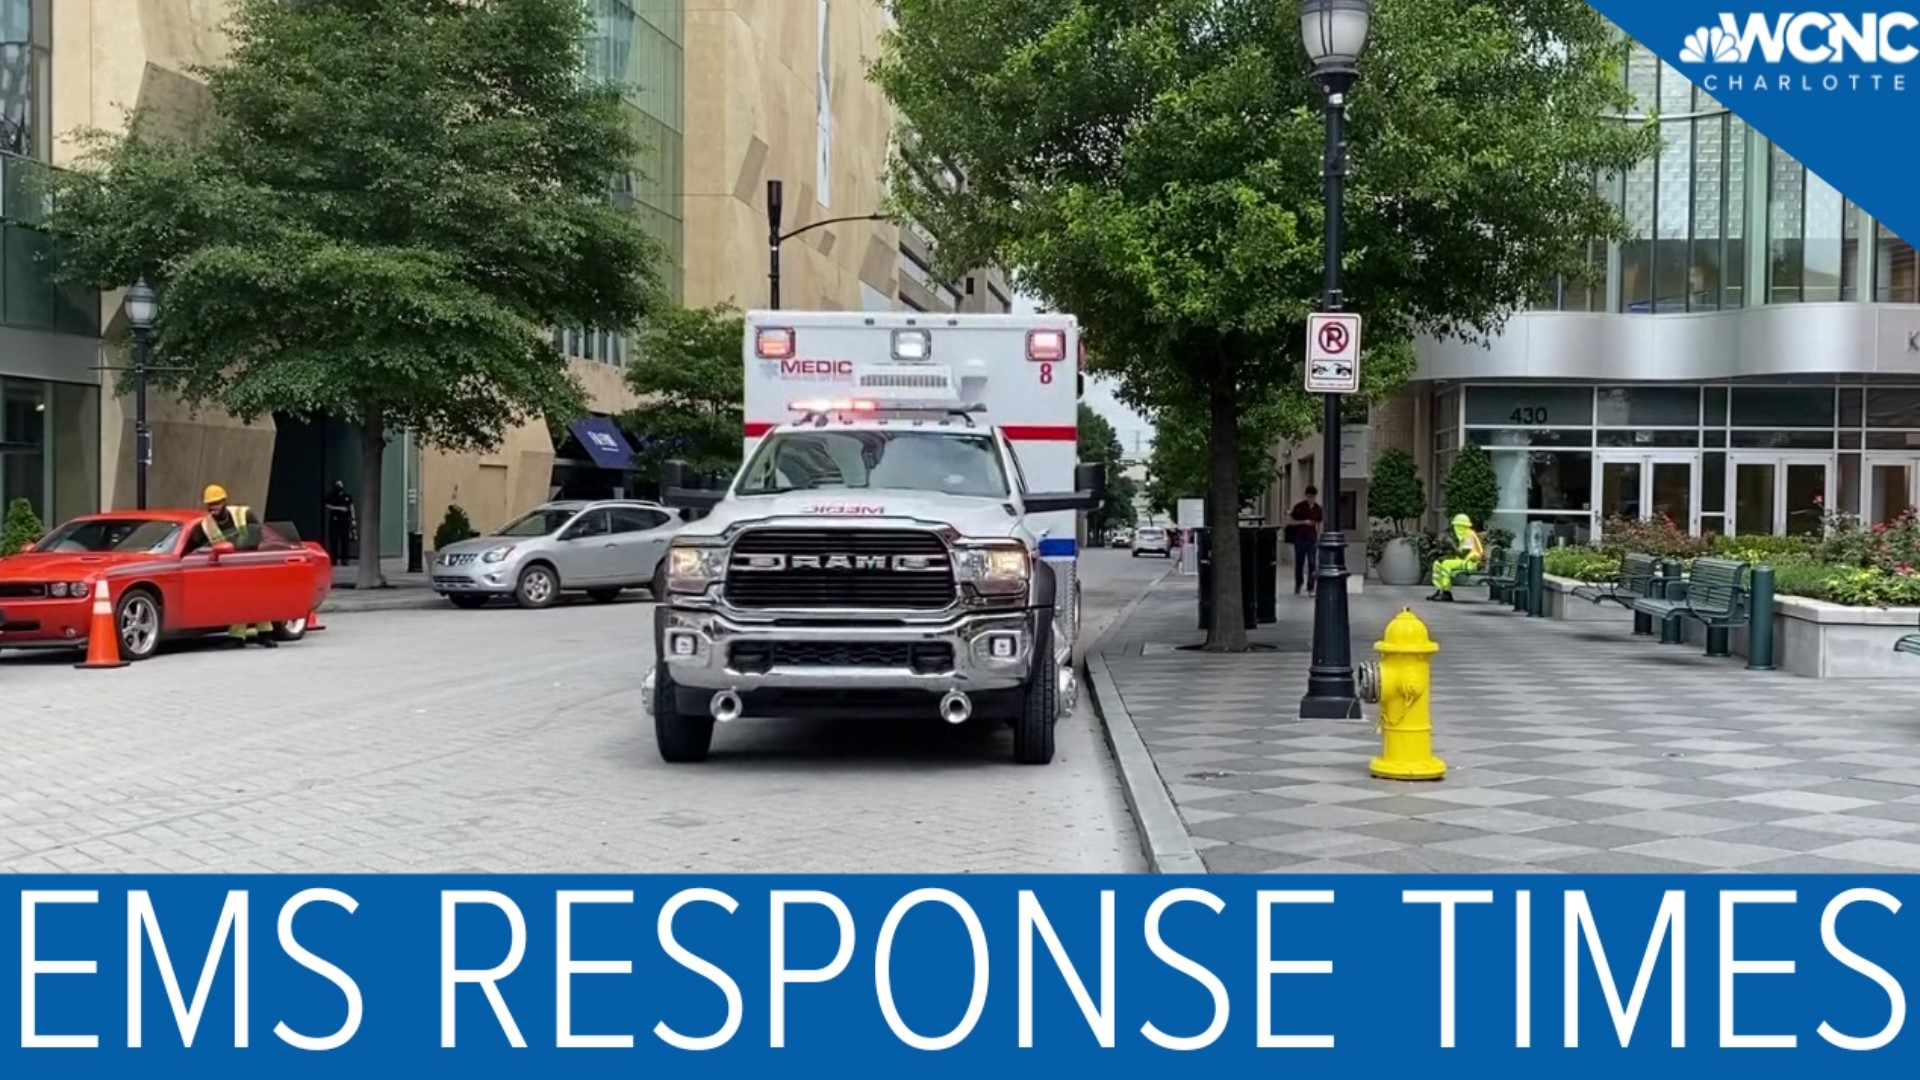 Big changes are coming to how emergency vehicles will respond in Mecklenburg County.